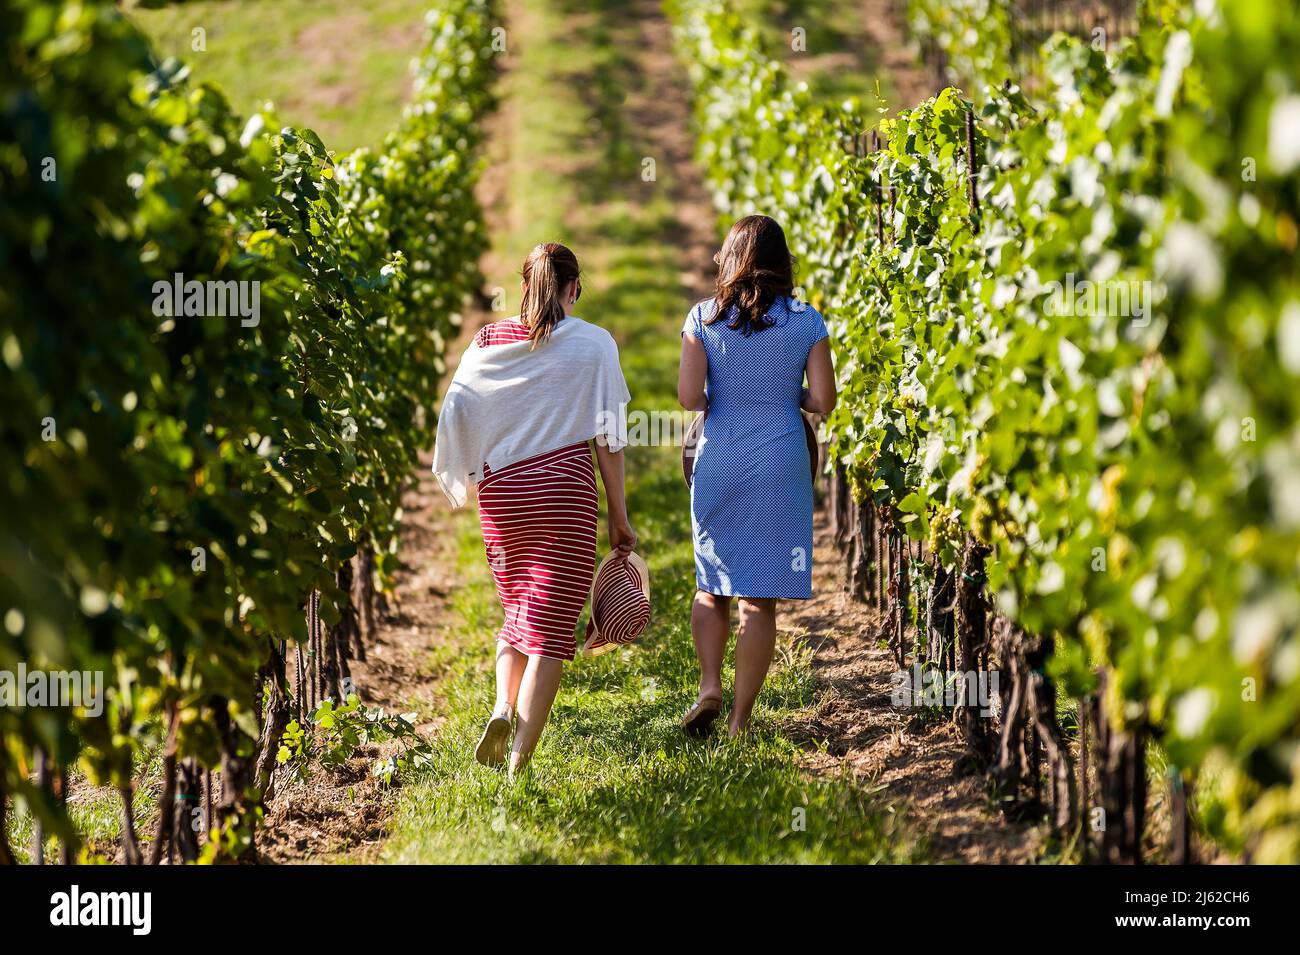 two women strolling in vineyard back to lens Stock Photo